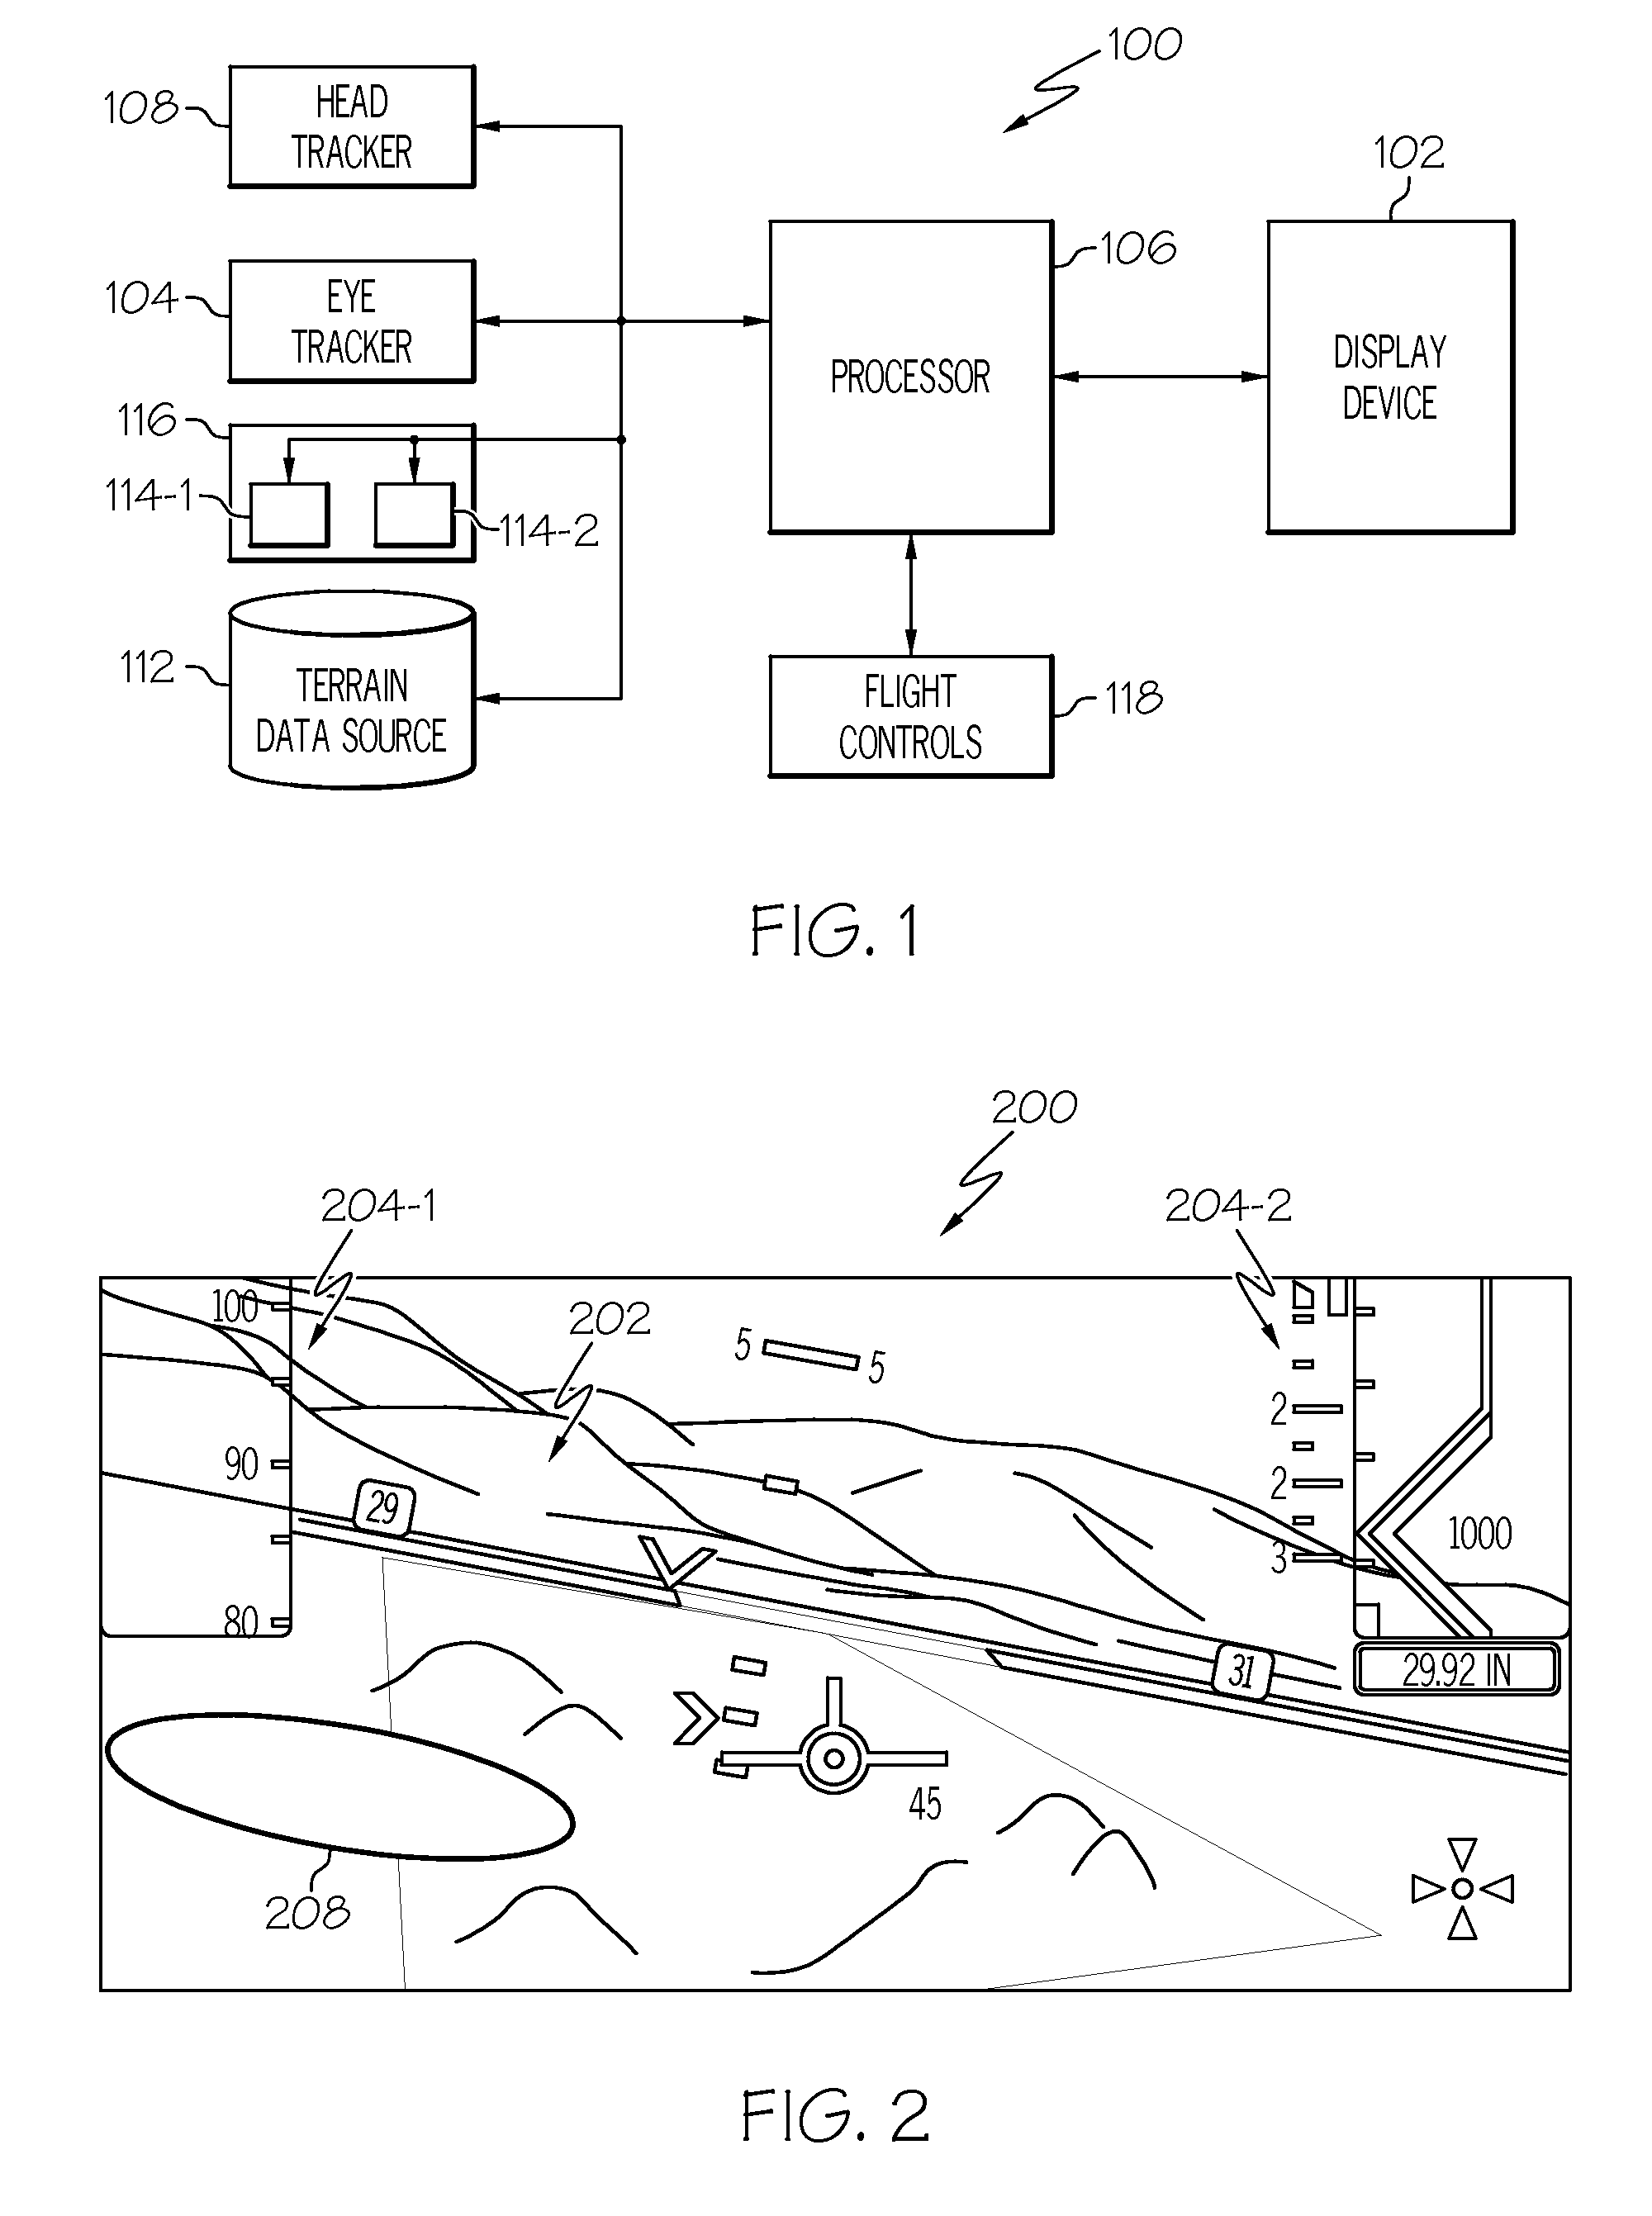 Gaze-based touchdown point selection system and method